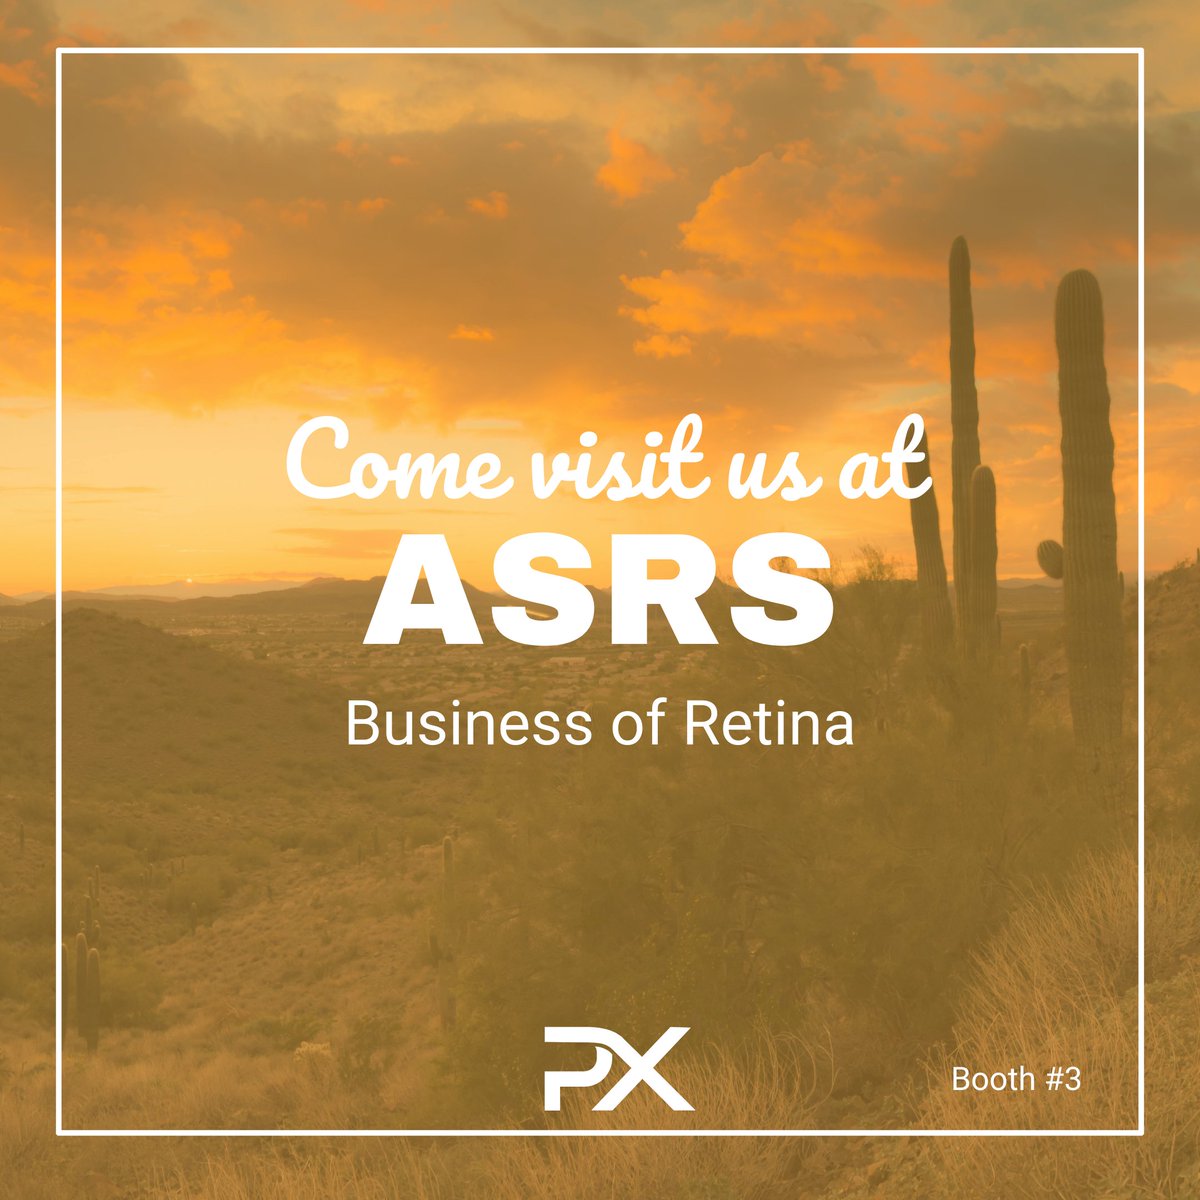 We're thrilled to be heading to Pheonix next week for ASRS's Business of Retina! Don't forget to stop by and say 'Hi' to Shawn and Mattie if you're attending. Looking forward to connecting with everyone there! #ASRS #BusinessOfRetina #Networking #PXTechnology